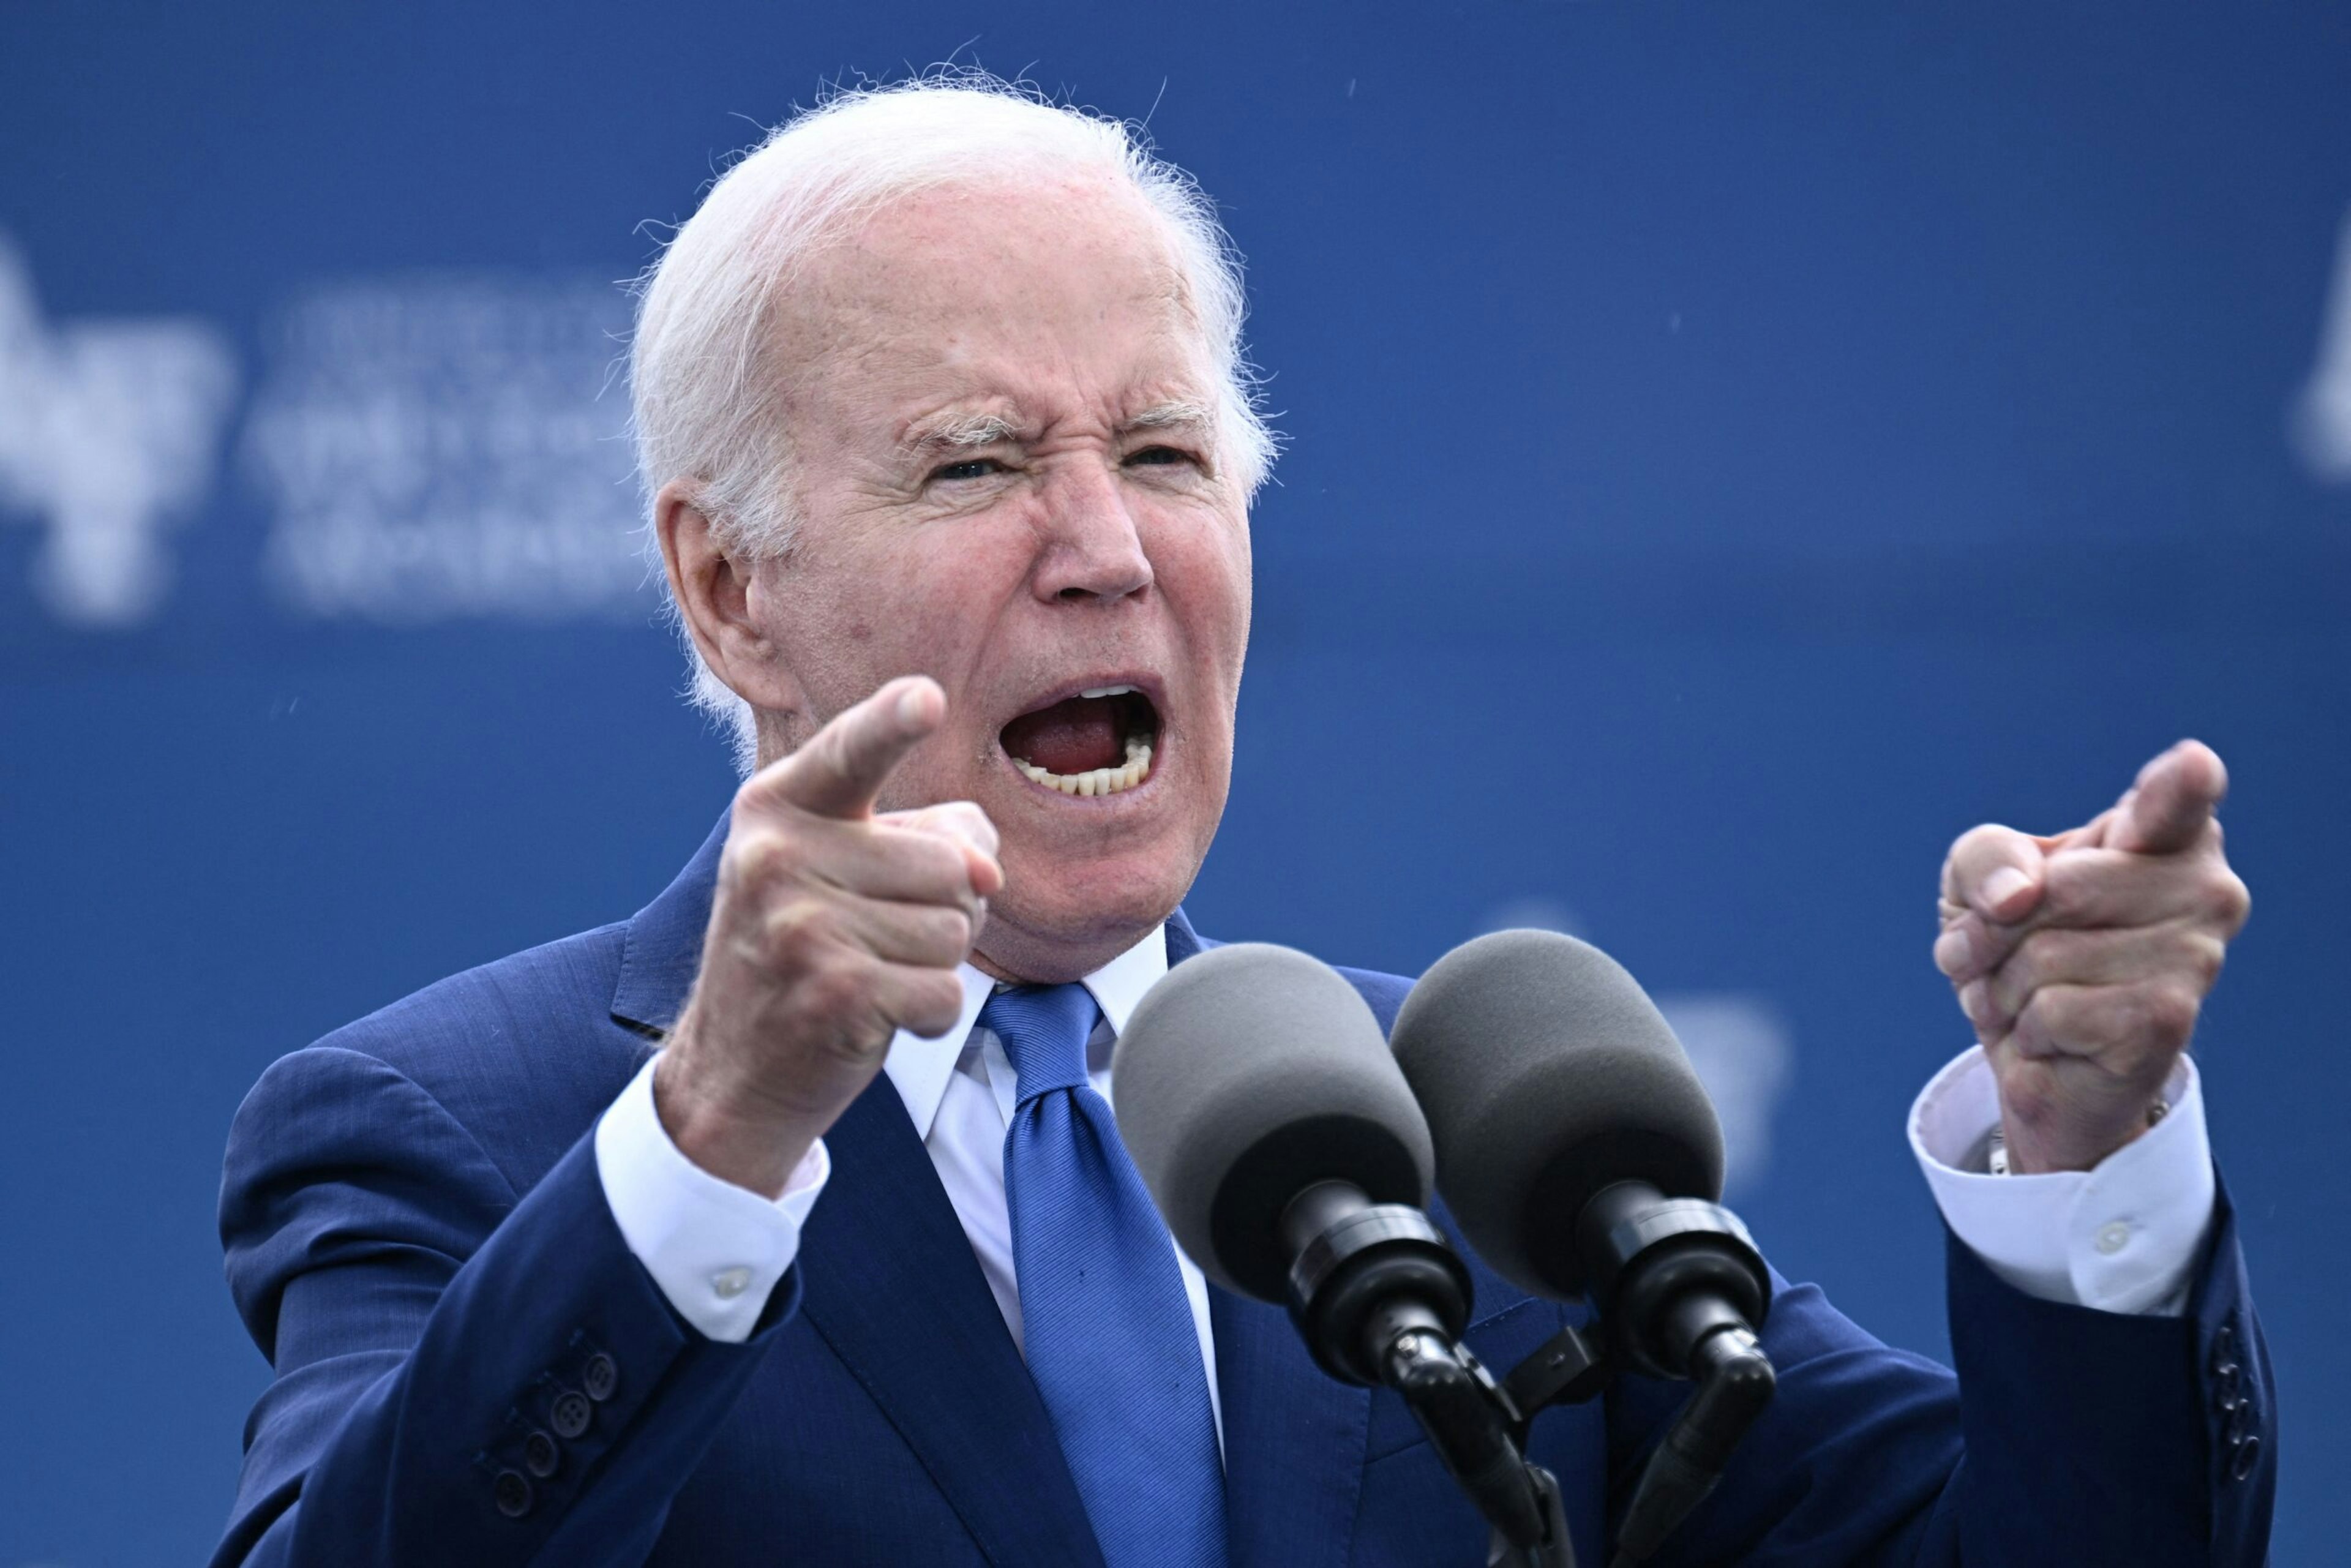 US President Joe Biden delivers the commencement address at the United States Air Force Academy, just north of Colorado Springs in El Paso County, Colorado, on June 1, 2023. (Photo by Brendan SMIALOWSKI / AFP) (Photo by BRENDAN SMIALOWSKI/AFP via Getty Images)